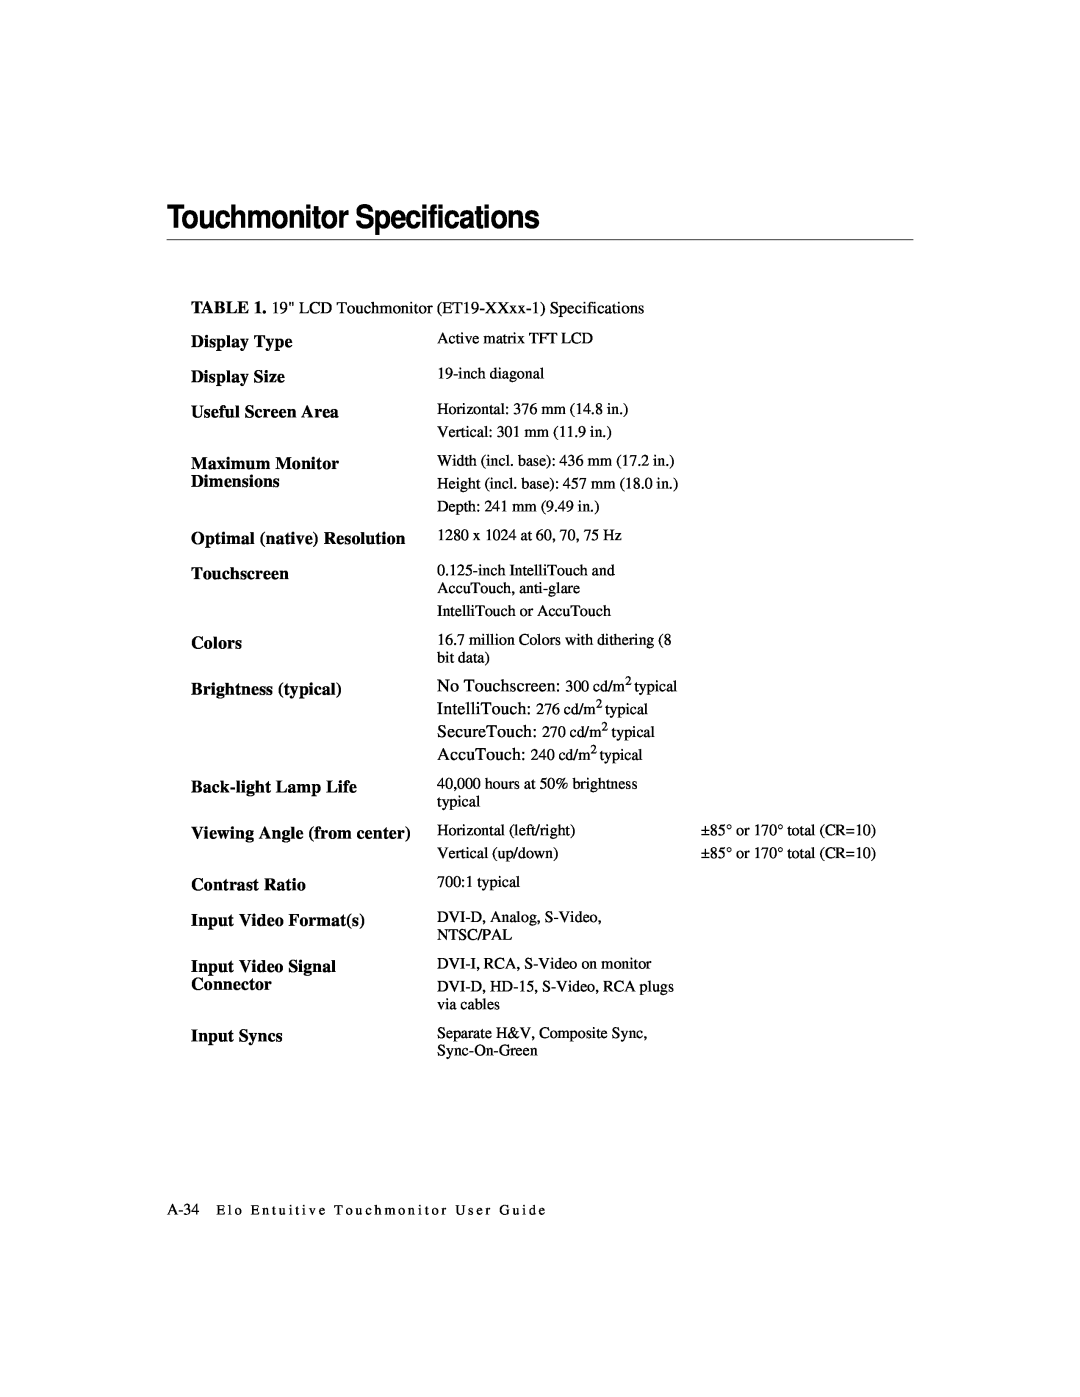 Elo TouchSystems 1925L manual Touchmonitor Specifications, 19 LCD Touchmonitor ET19-XXxx-1 Specifications, Display Type 